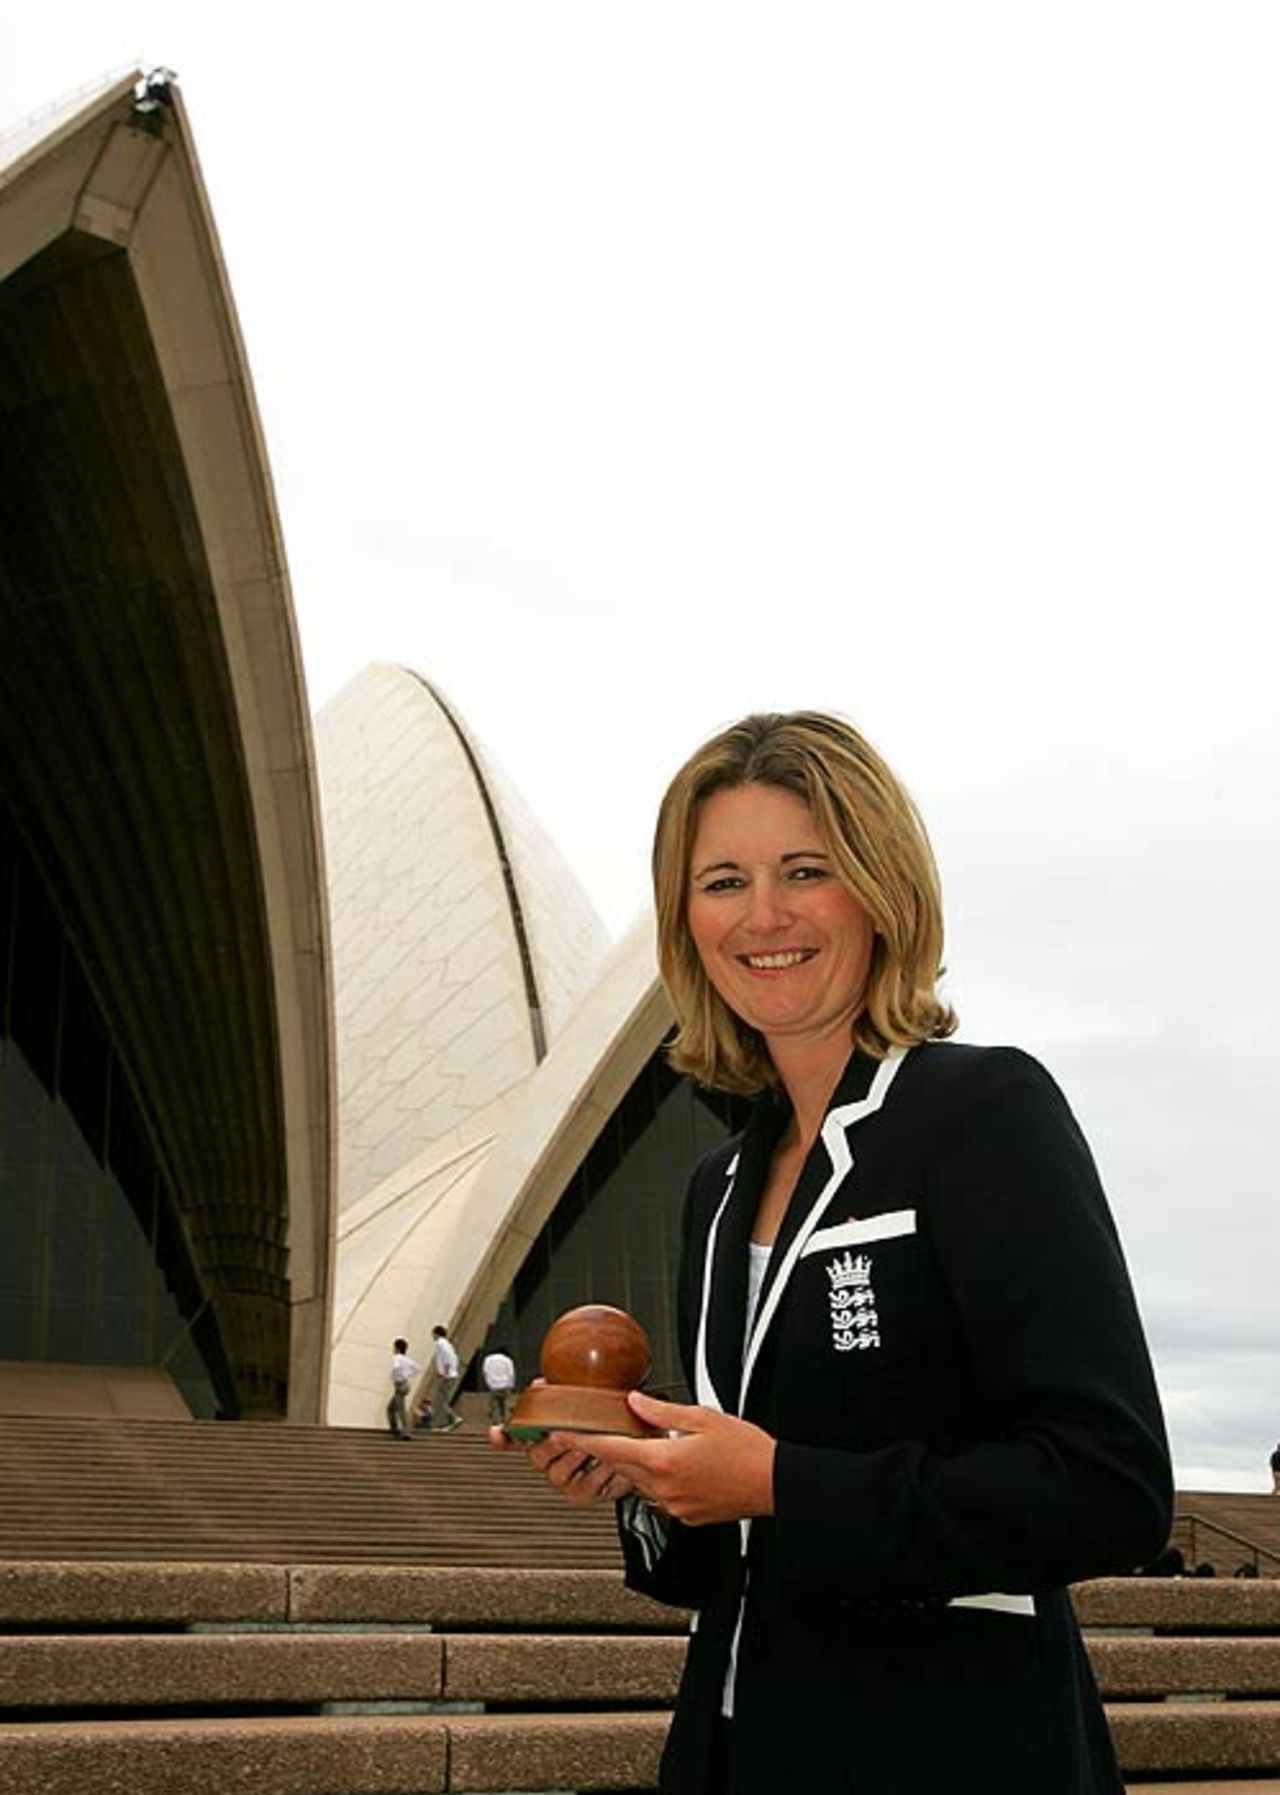 England's captain Charlotte Edwards with the Ashes Trophy, Sydney, February 17, 2008